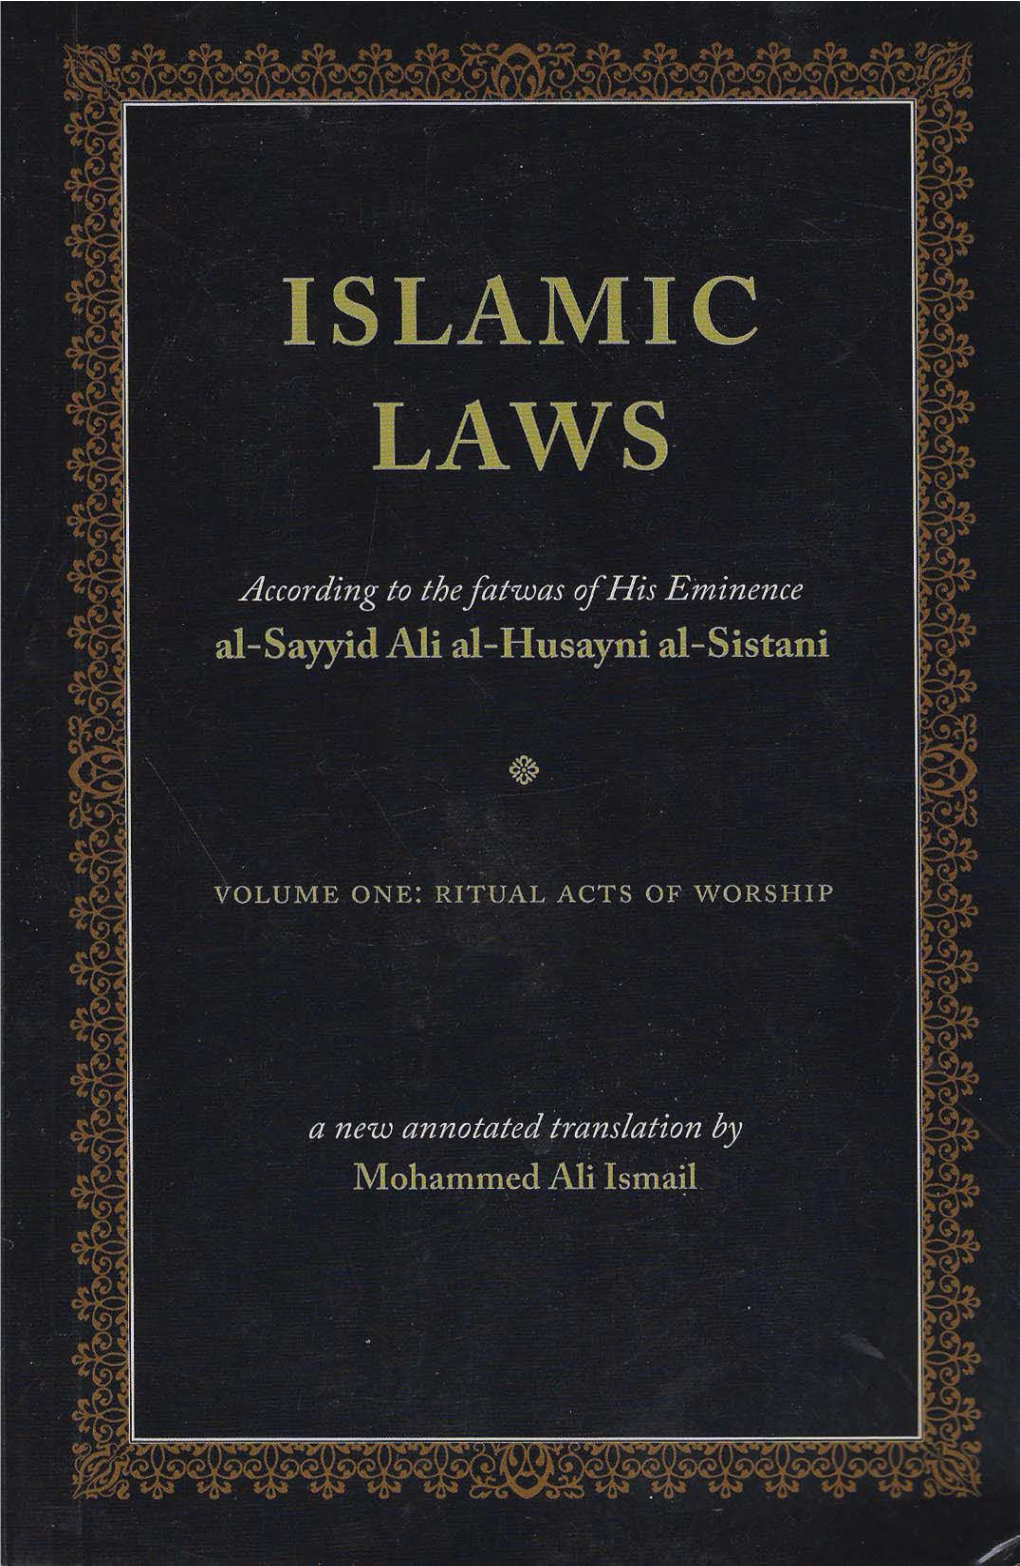 Islamic Laws (Volume One : Ritual Acts of Worship)